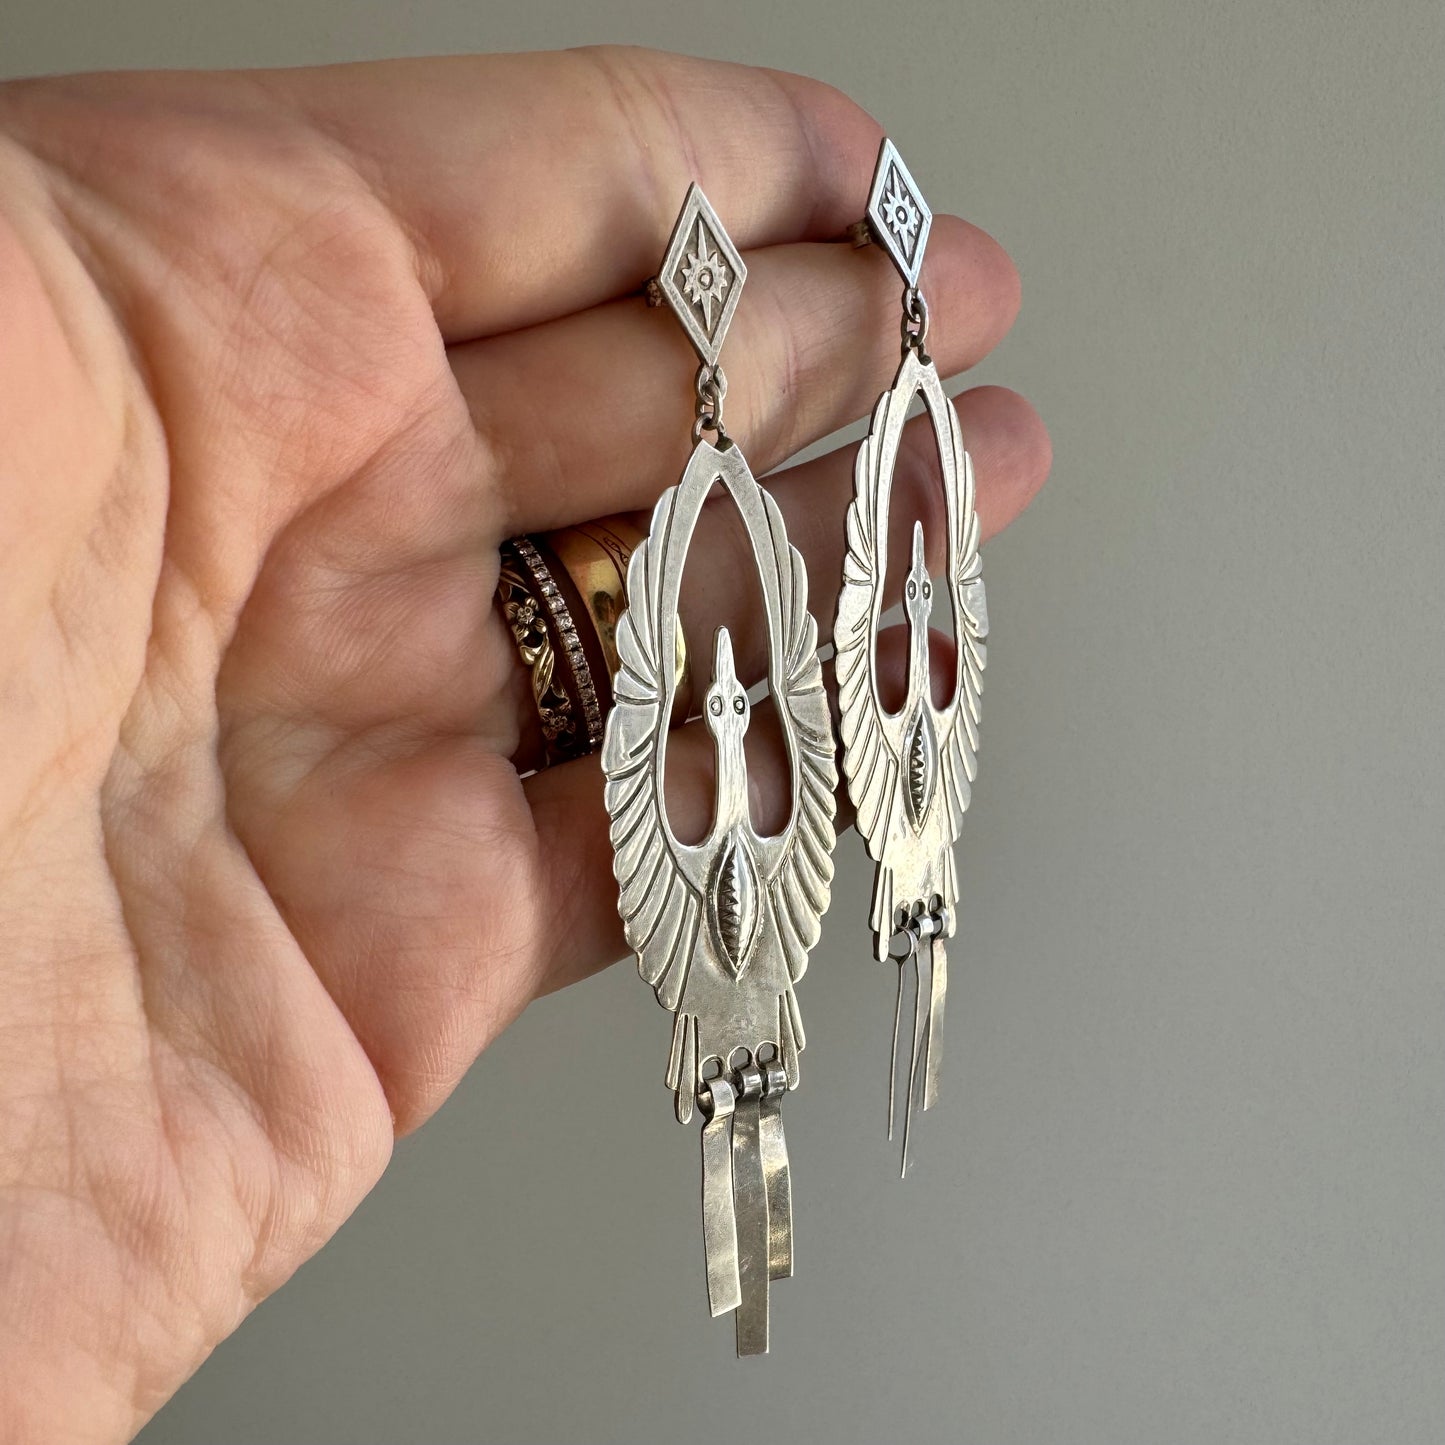 V I N T A G E // fly high / sterling silver thunderbird or phoenix rising statement earrings